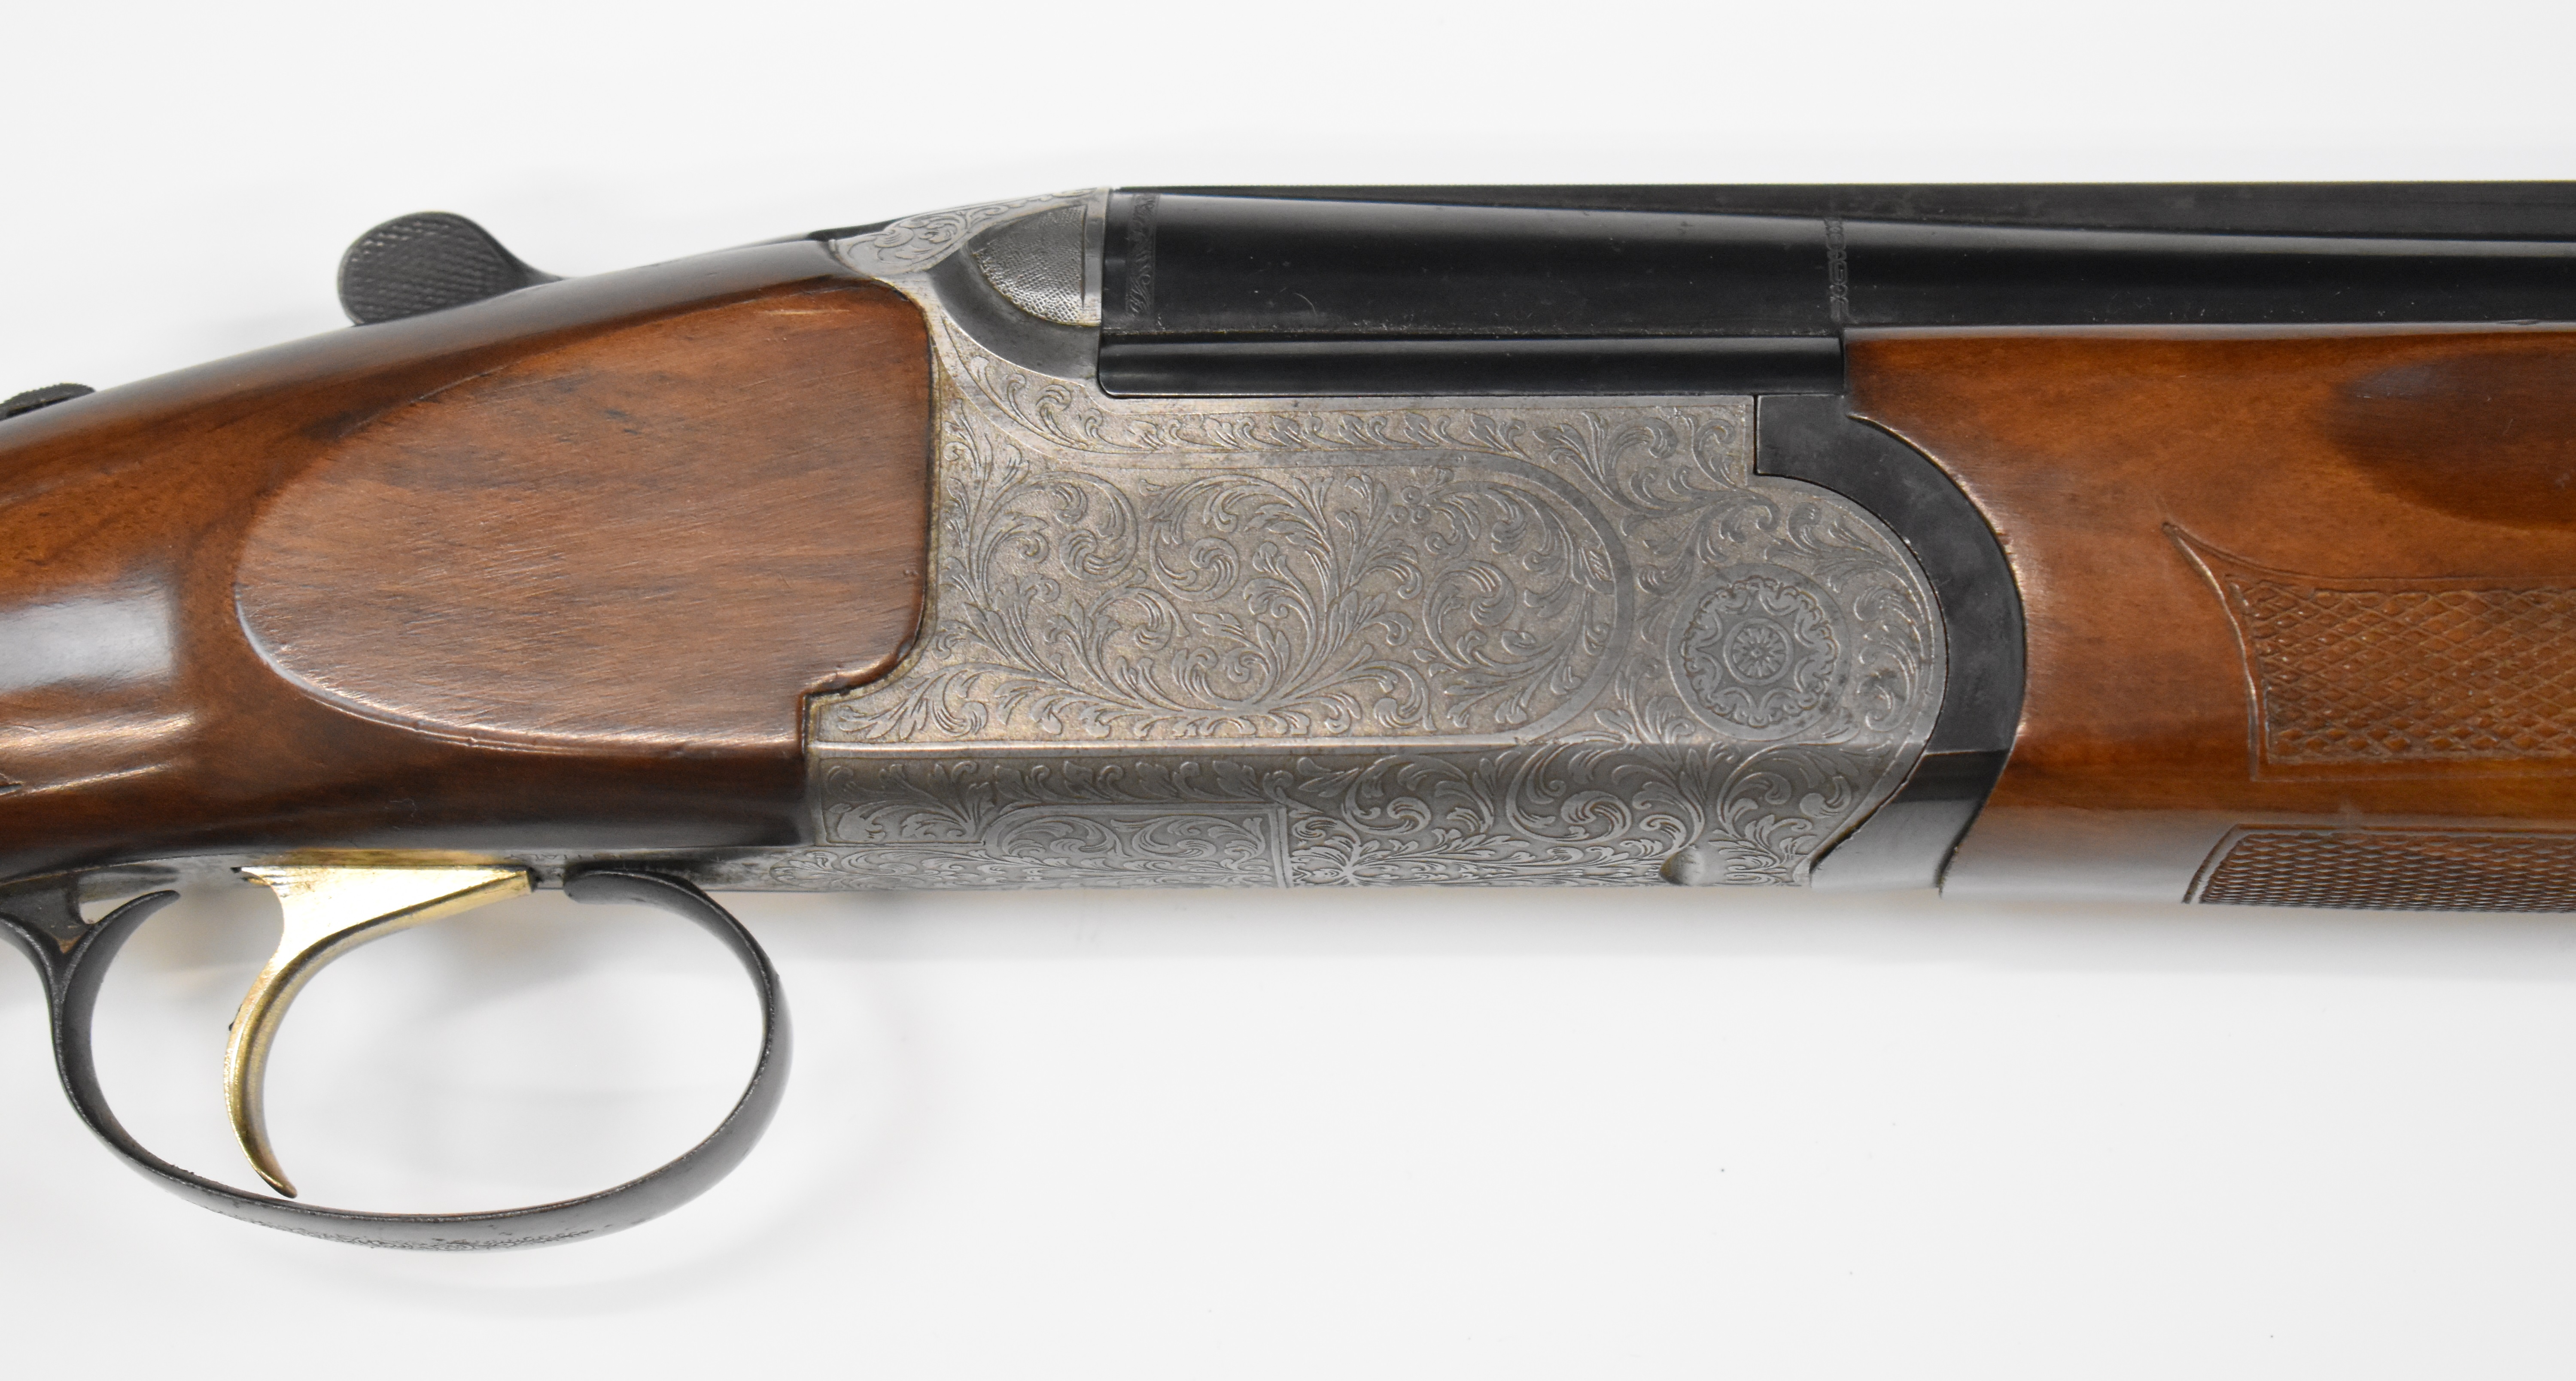 Sabatti 12 bore over under ejector shotgun with engraved lock, underside, top plate, trigger guard - Image 6 of 10